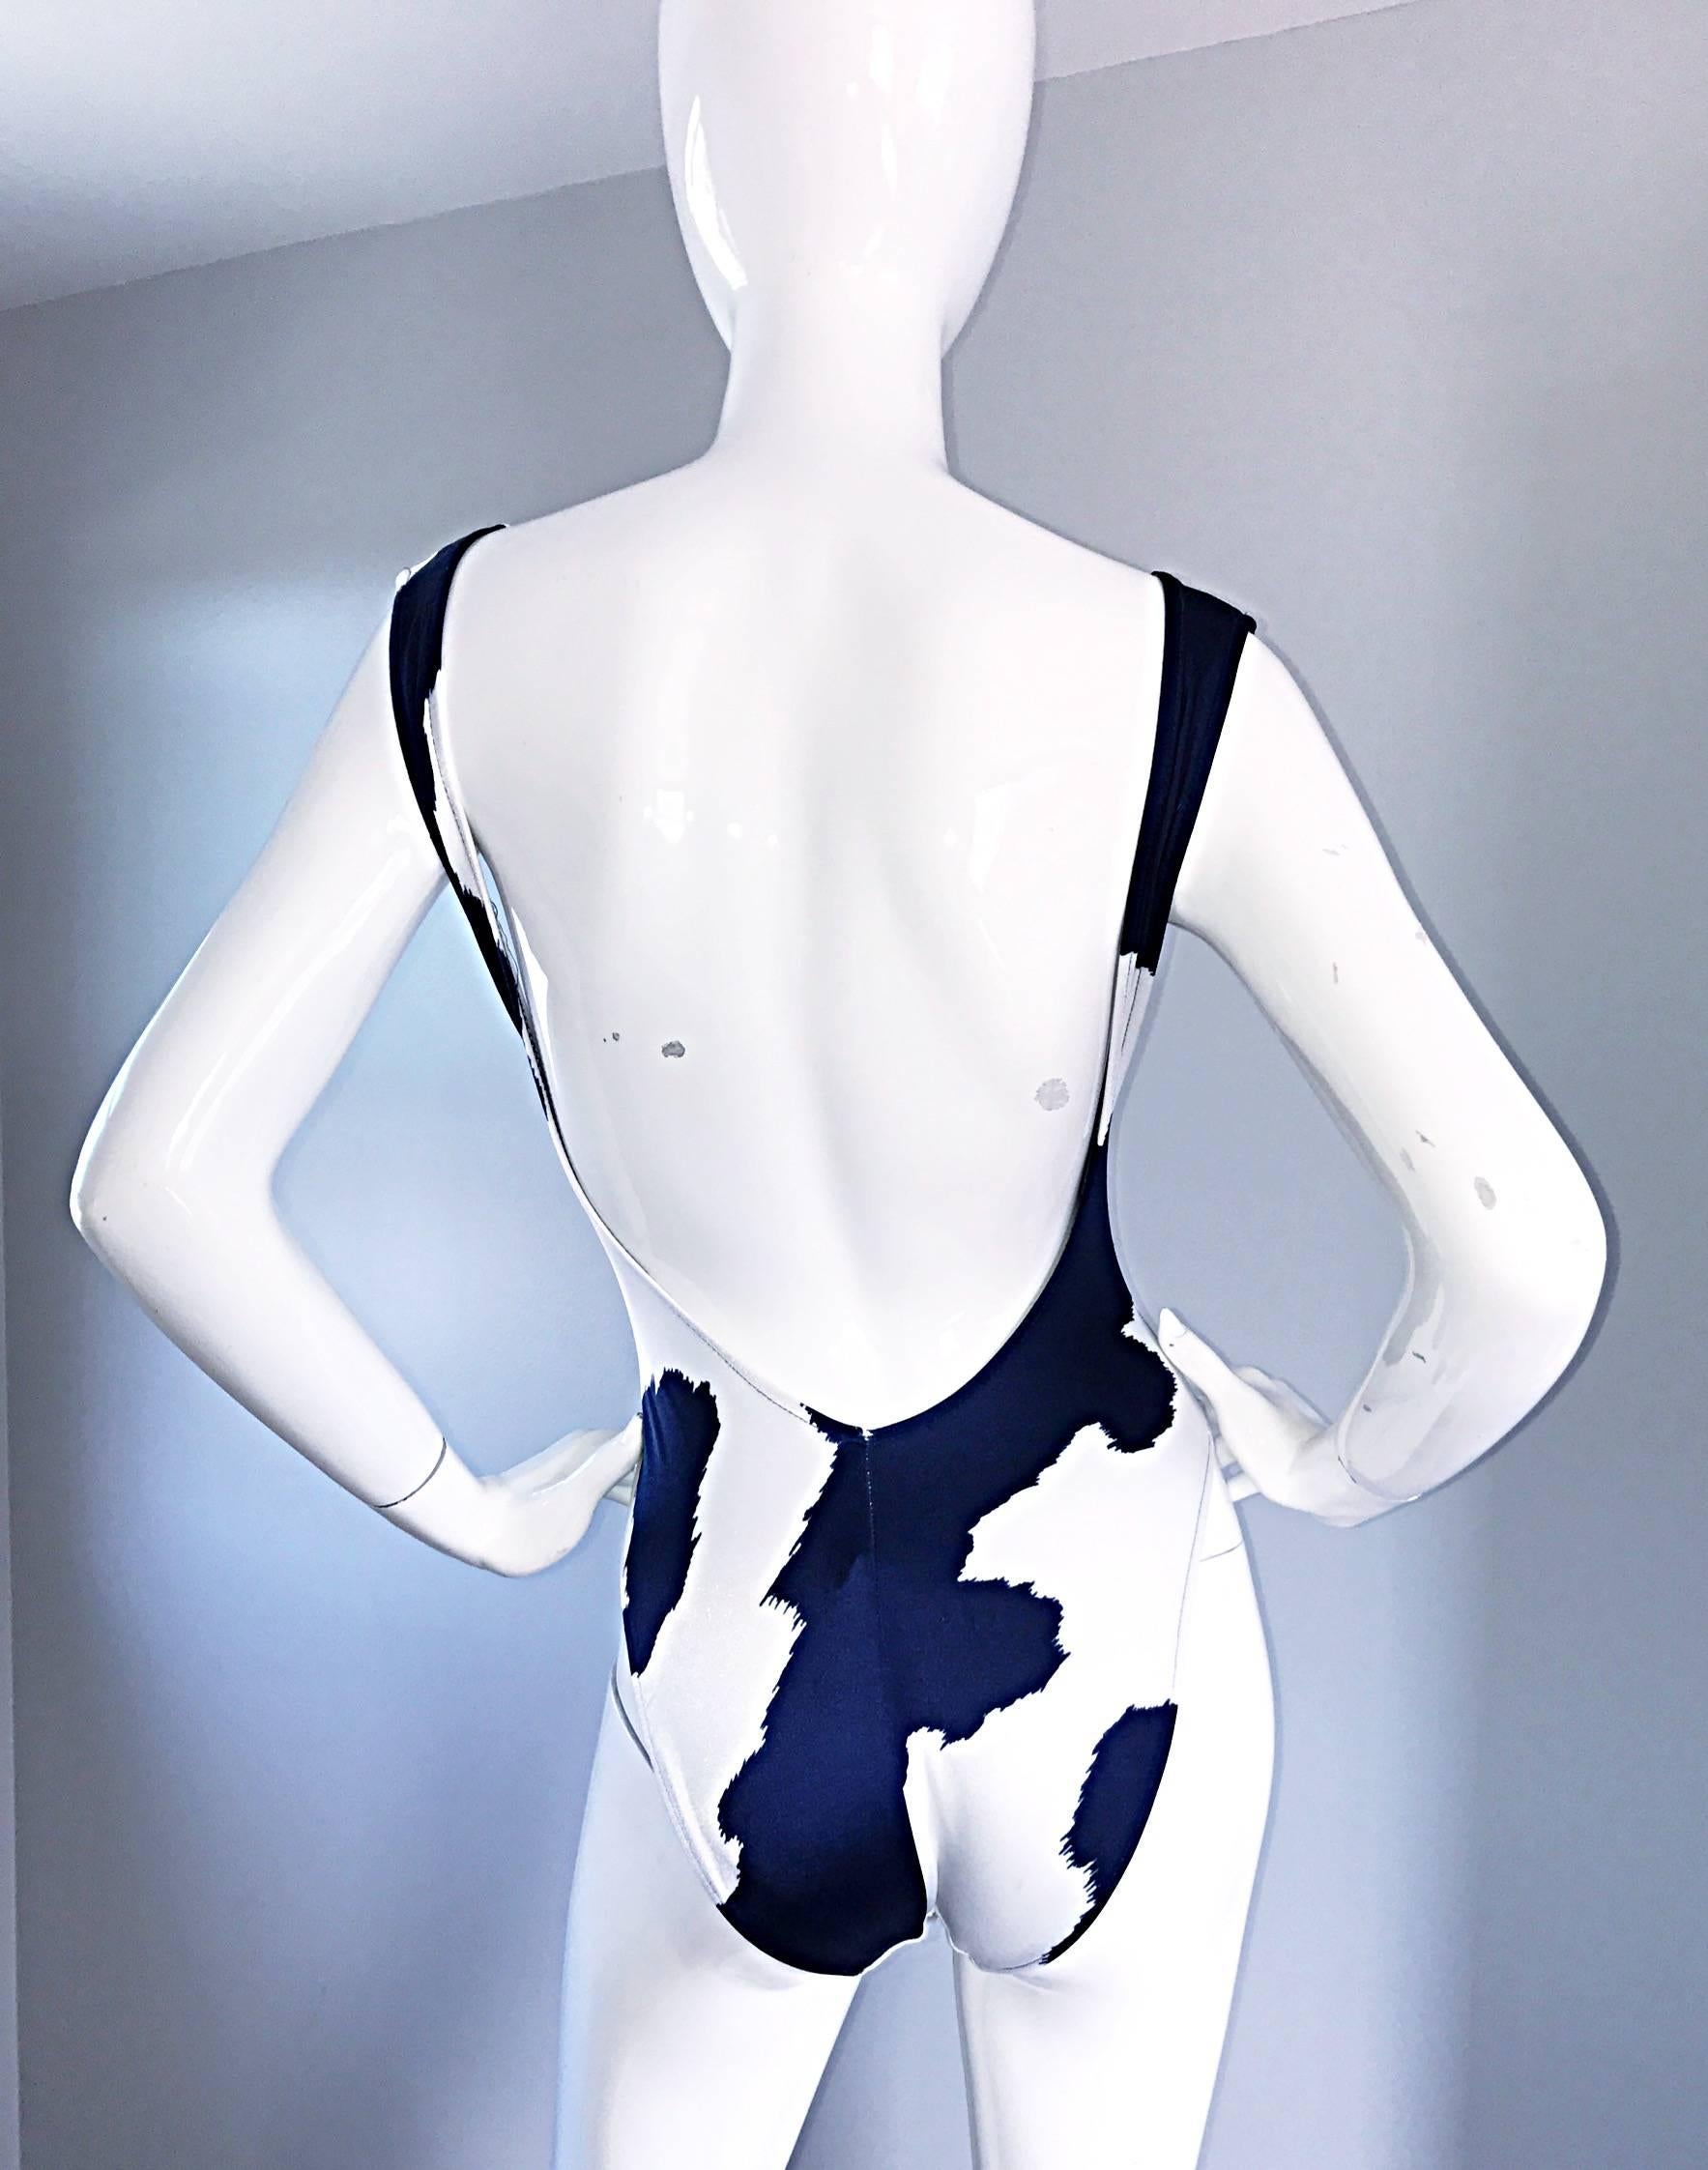 Amazing Bill BLASS Navy Blue and White Plunging One Piece Swimsuit Bodysuit 1